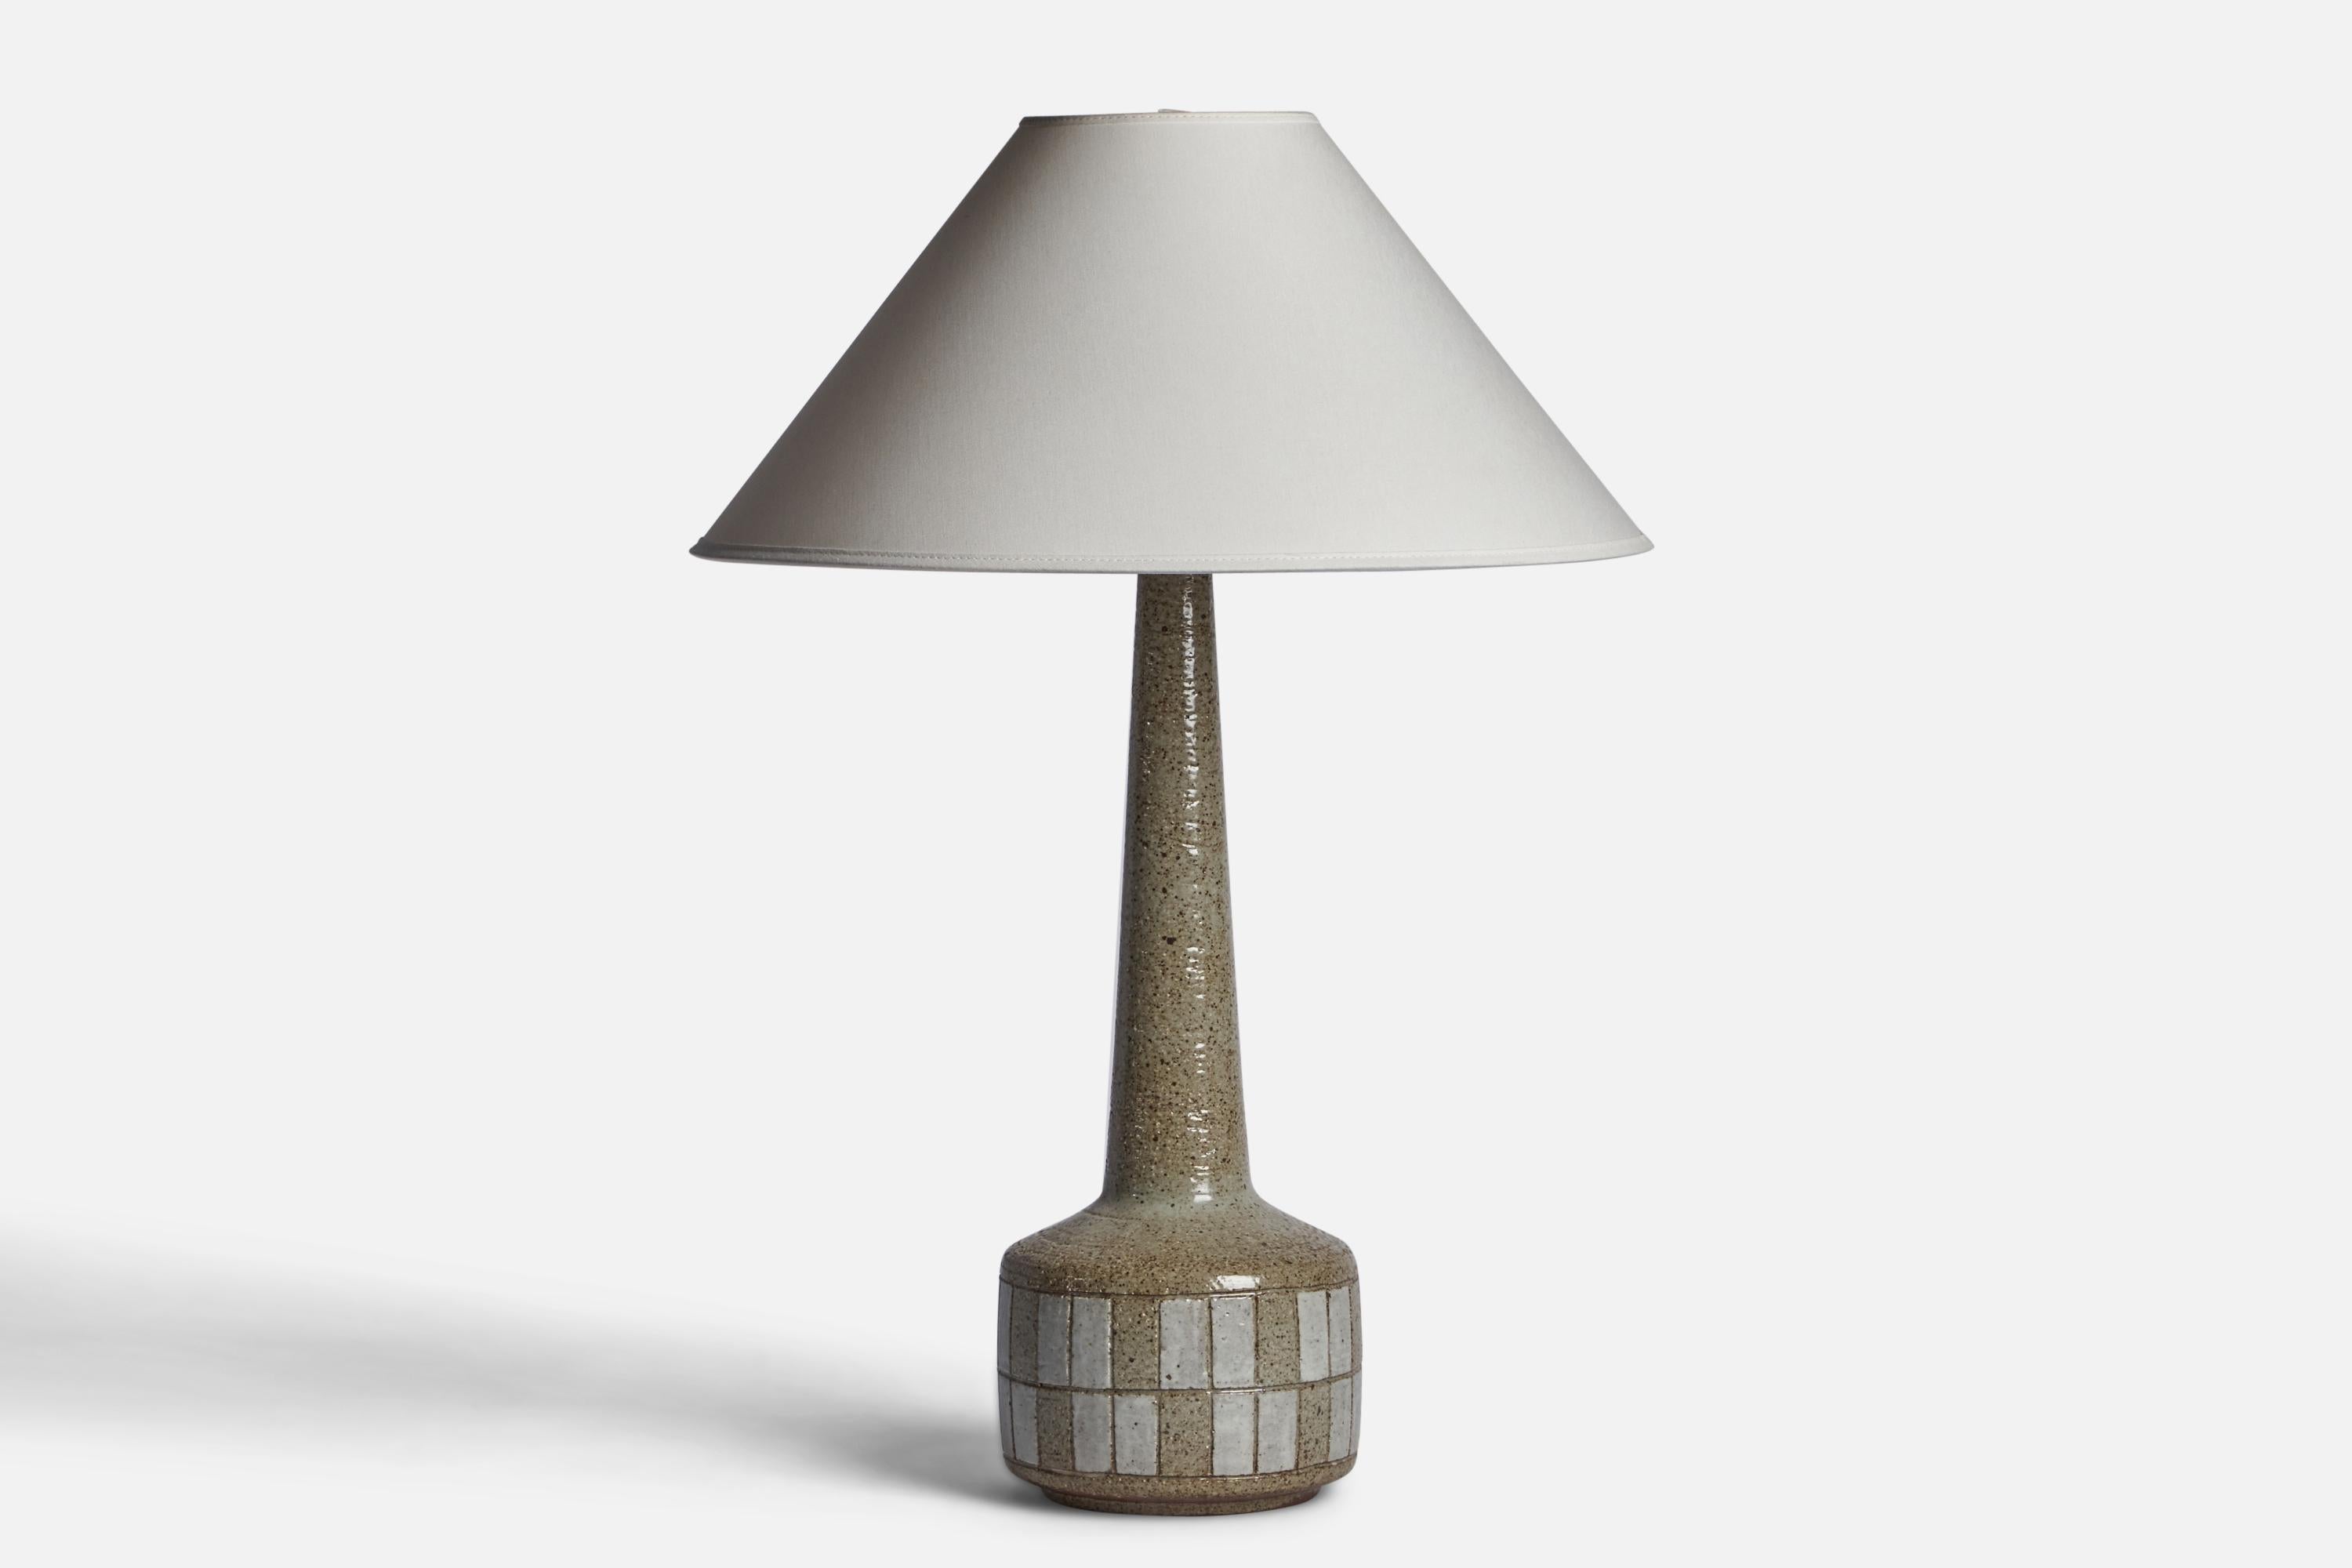 A light grey-glazed stoneware table lamp designed by Per & Annelise Linneman-Schmidt and produced by Palshus, Denmark, 1960s

Dimensions of Lamp (inches): 18.65” H x 6” Diameter
Dimensions of Shade (inches): 4.5” Top Diameter x 16” Bottom Diameter x